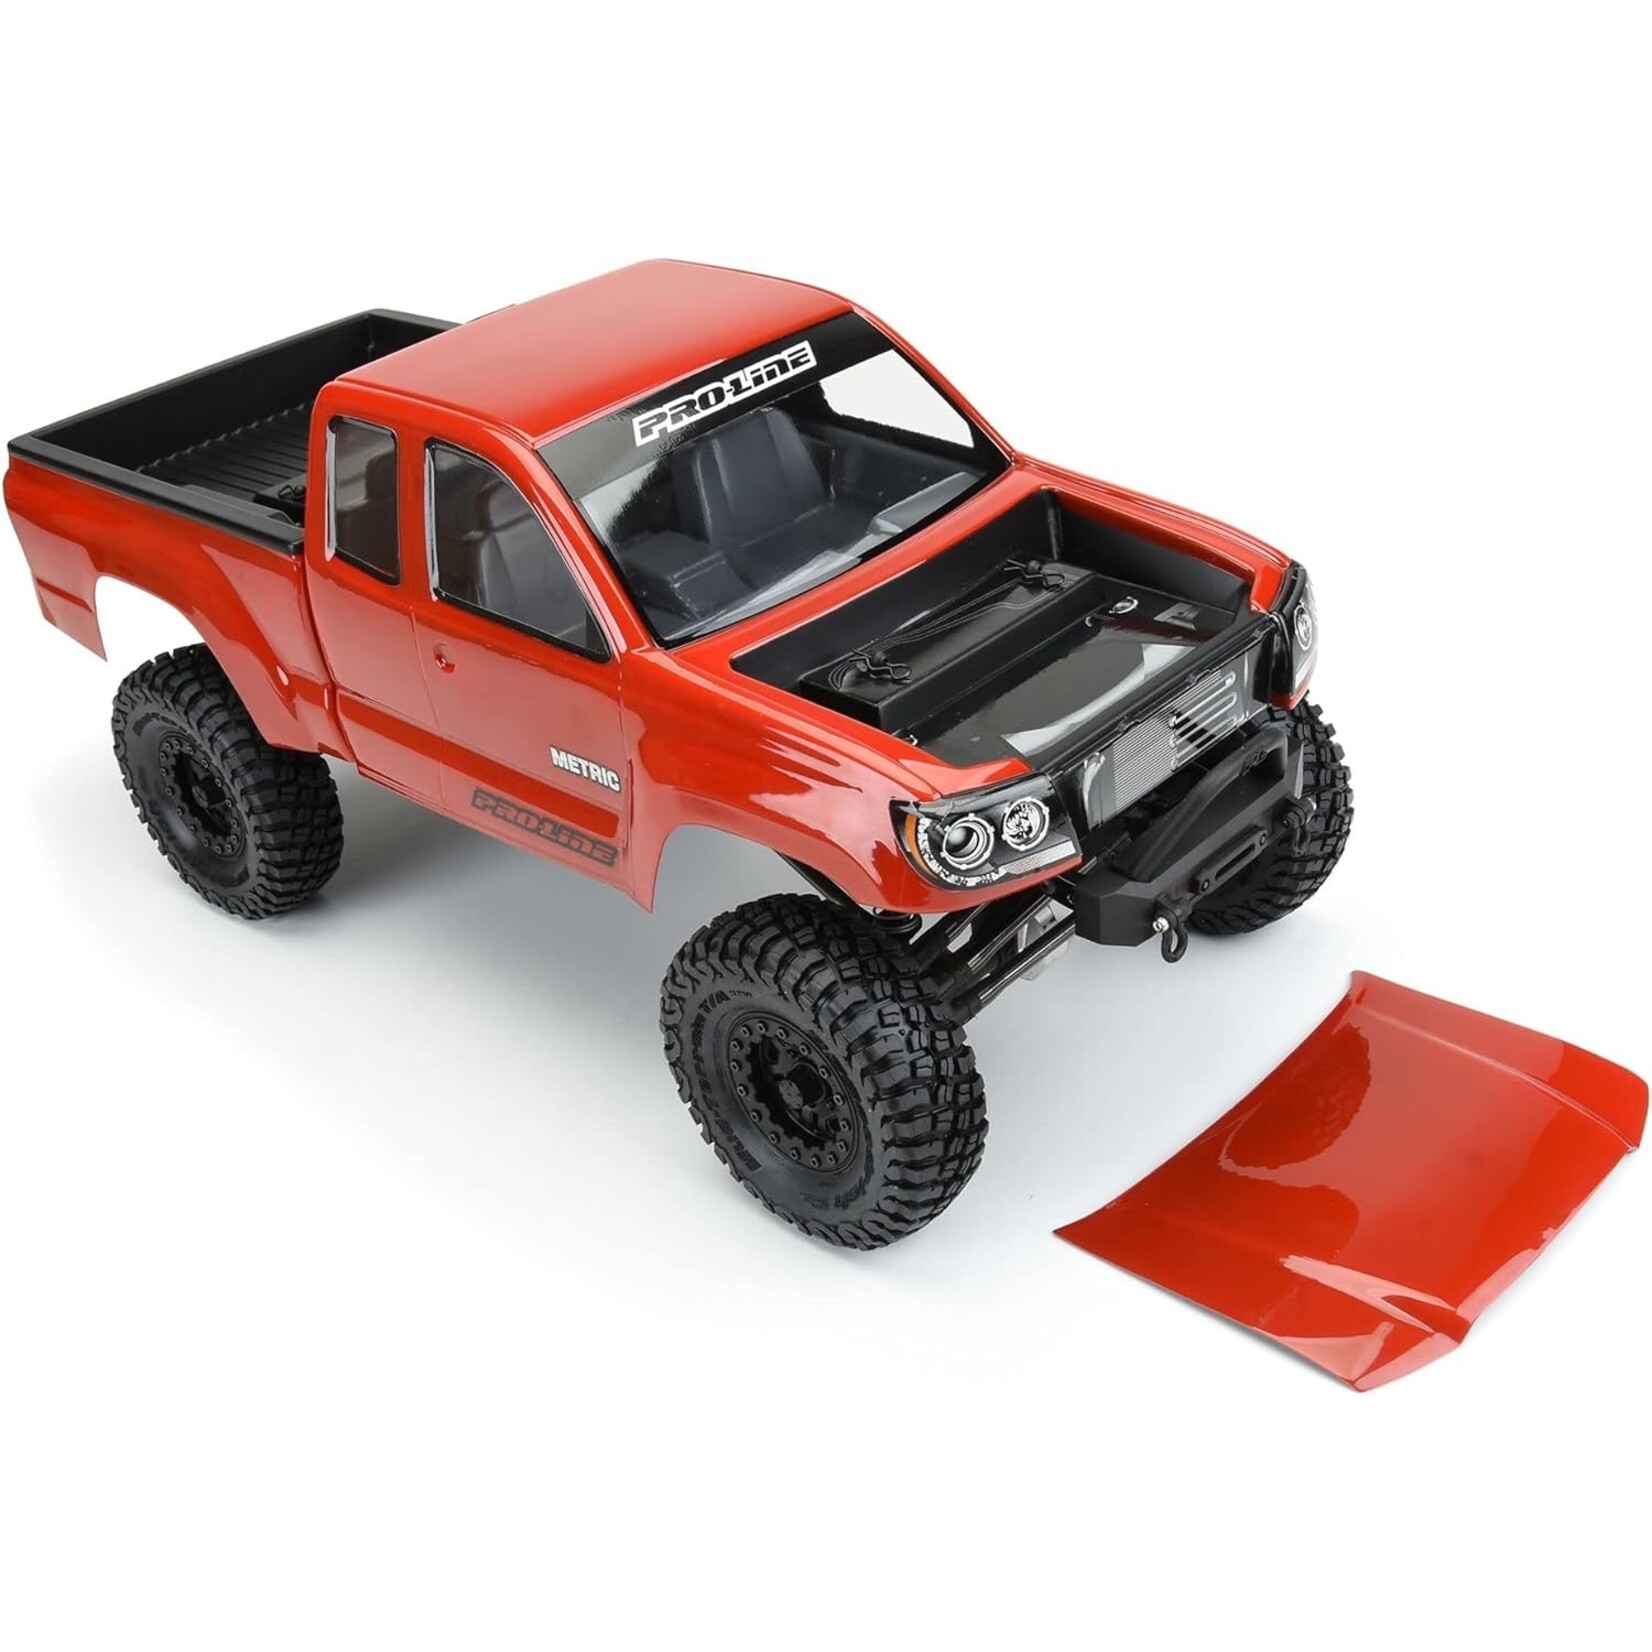 Pro-Line Pro-Line Builder Series: Metric 12.3" Rock Crawler Body (Clear) w/Cab, Bed & Opening Hood #3520-00